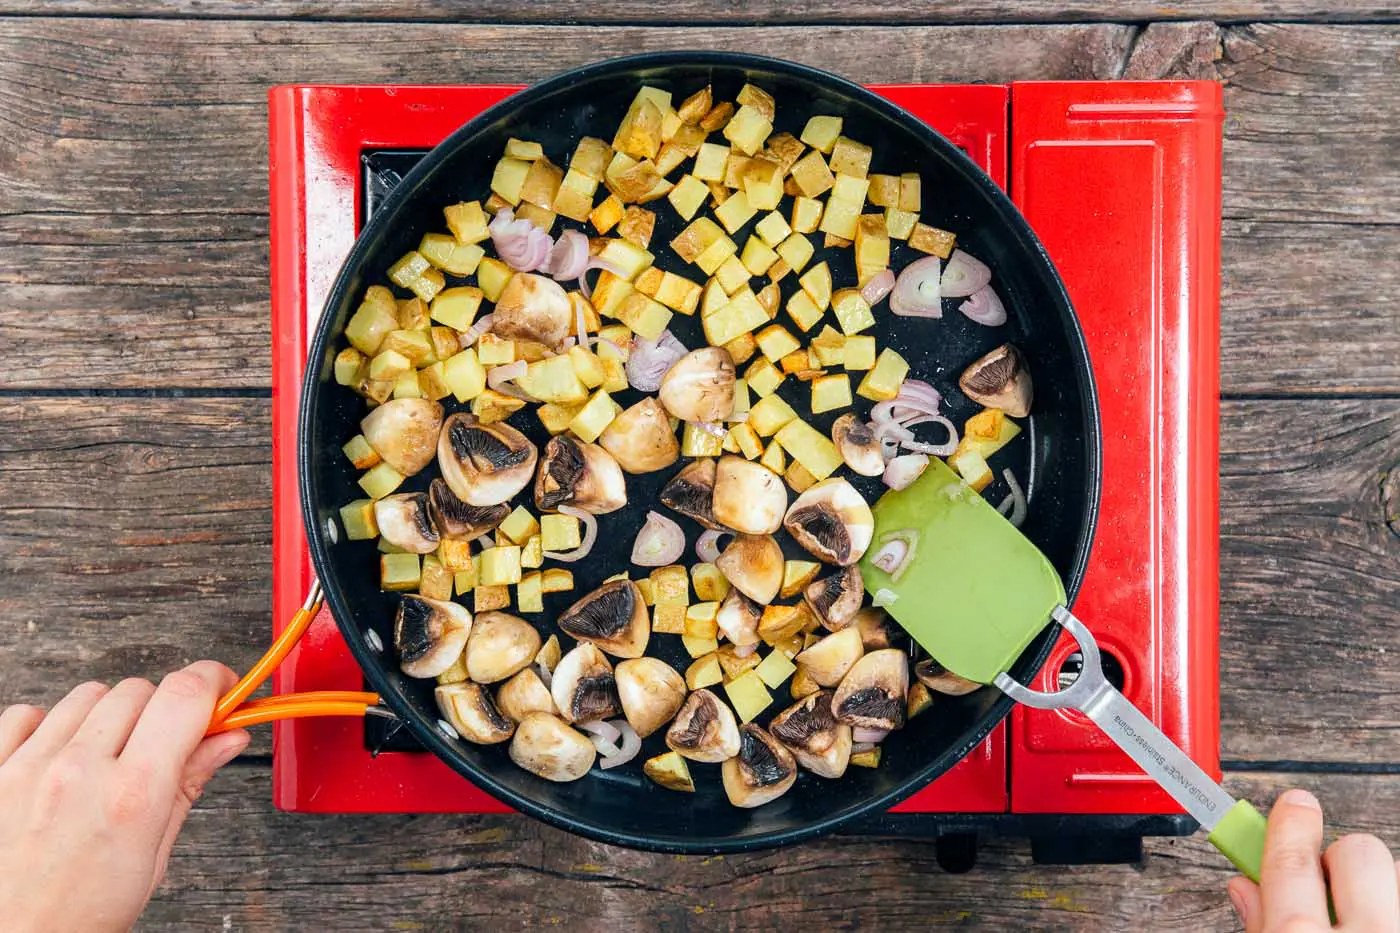 Sauteing cubed potatoes, quartered mushrooms, and shallots in a large skillet for a tofu scramble